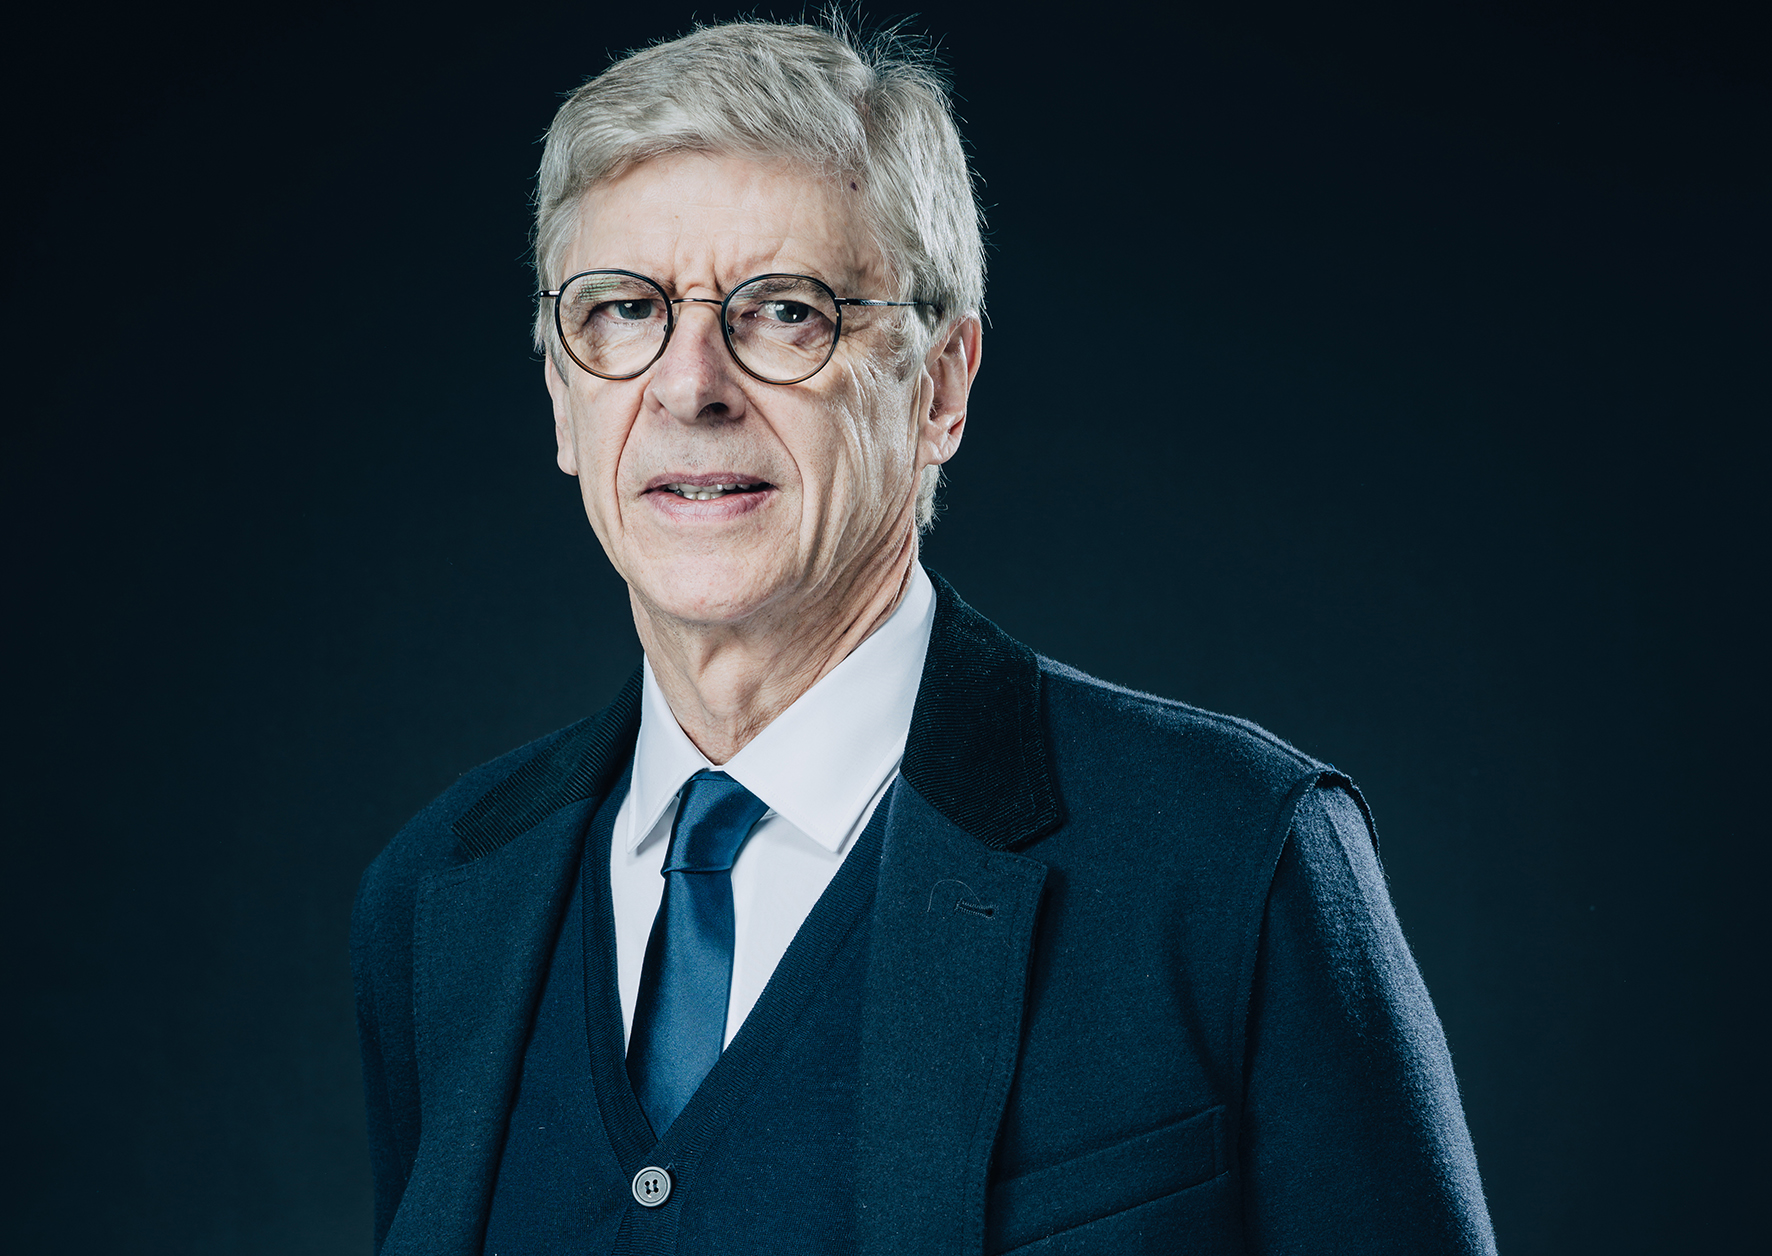 Arsene Wenger: Invincible' - Release date, trailer and more